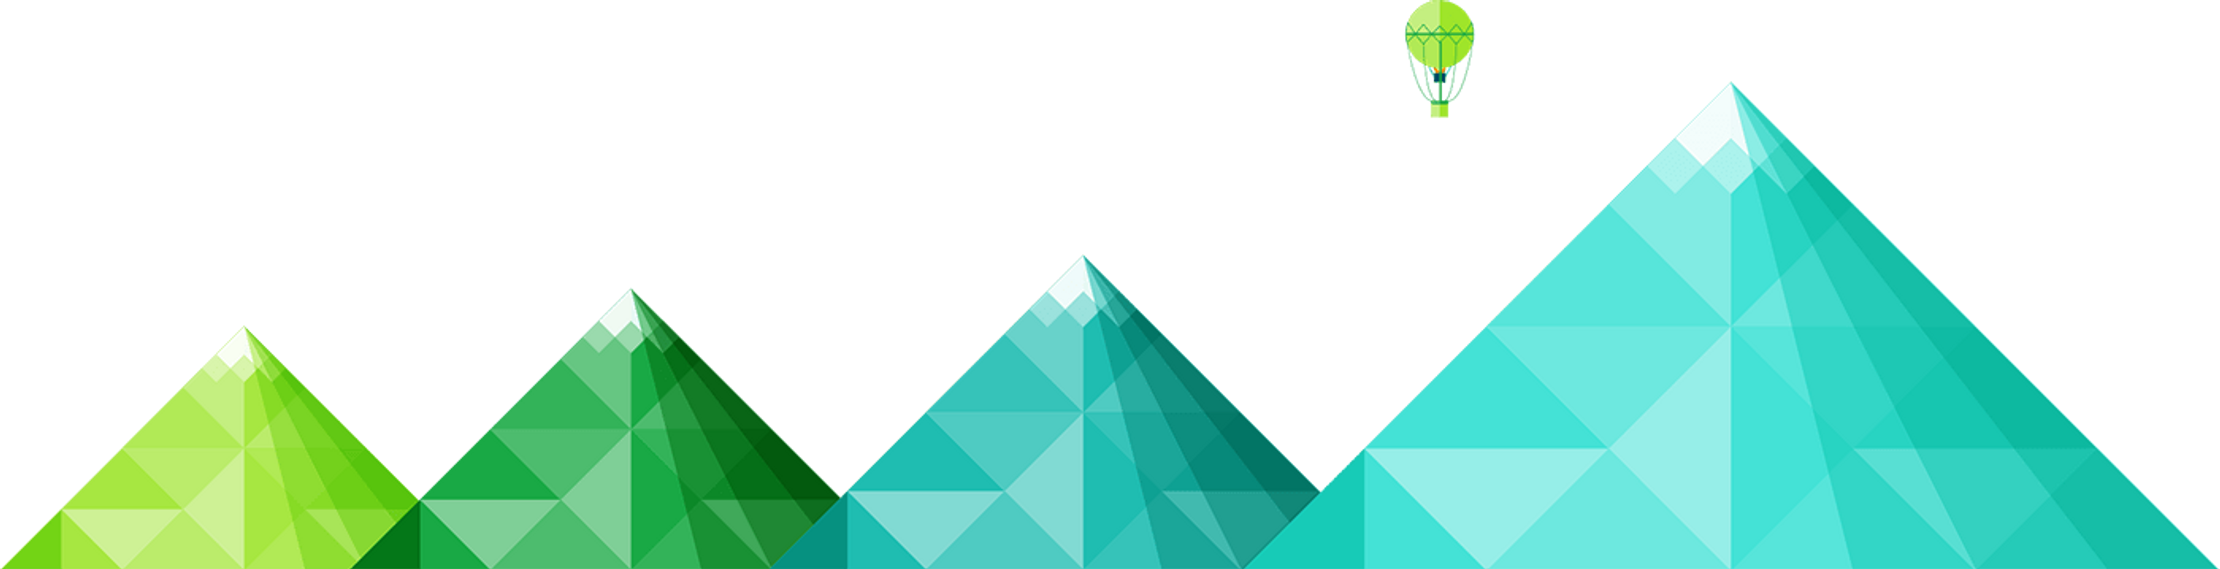 A graphic of four blue/green low-poly, two dimensional mountains.